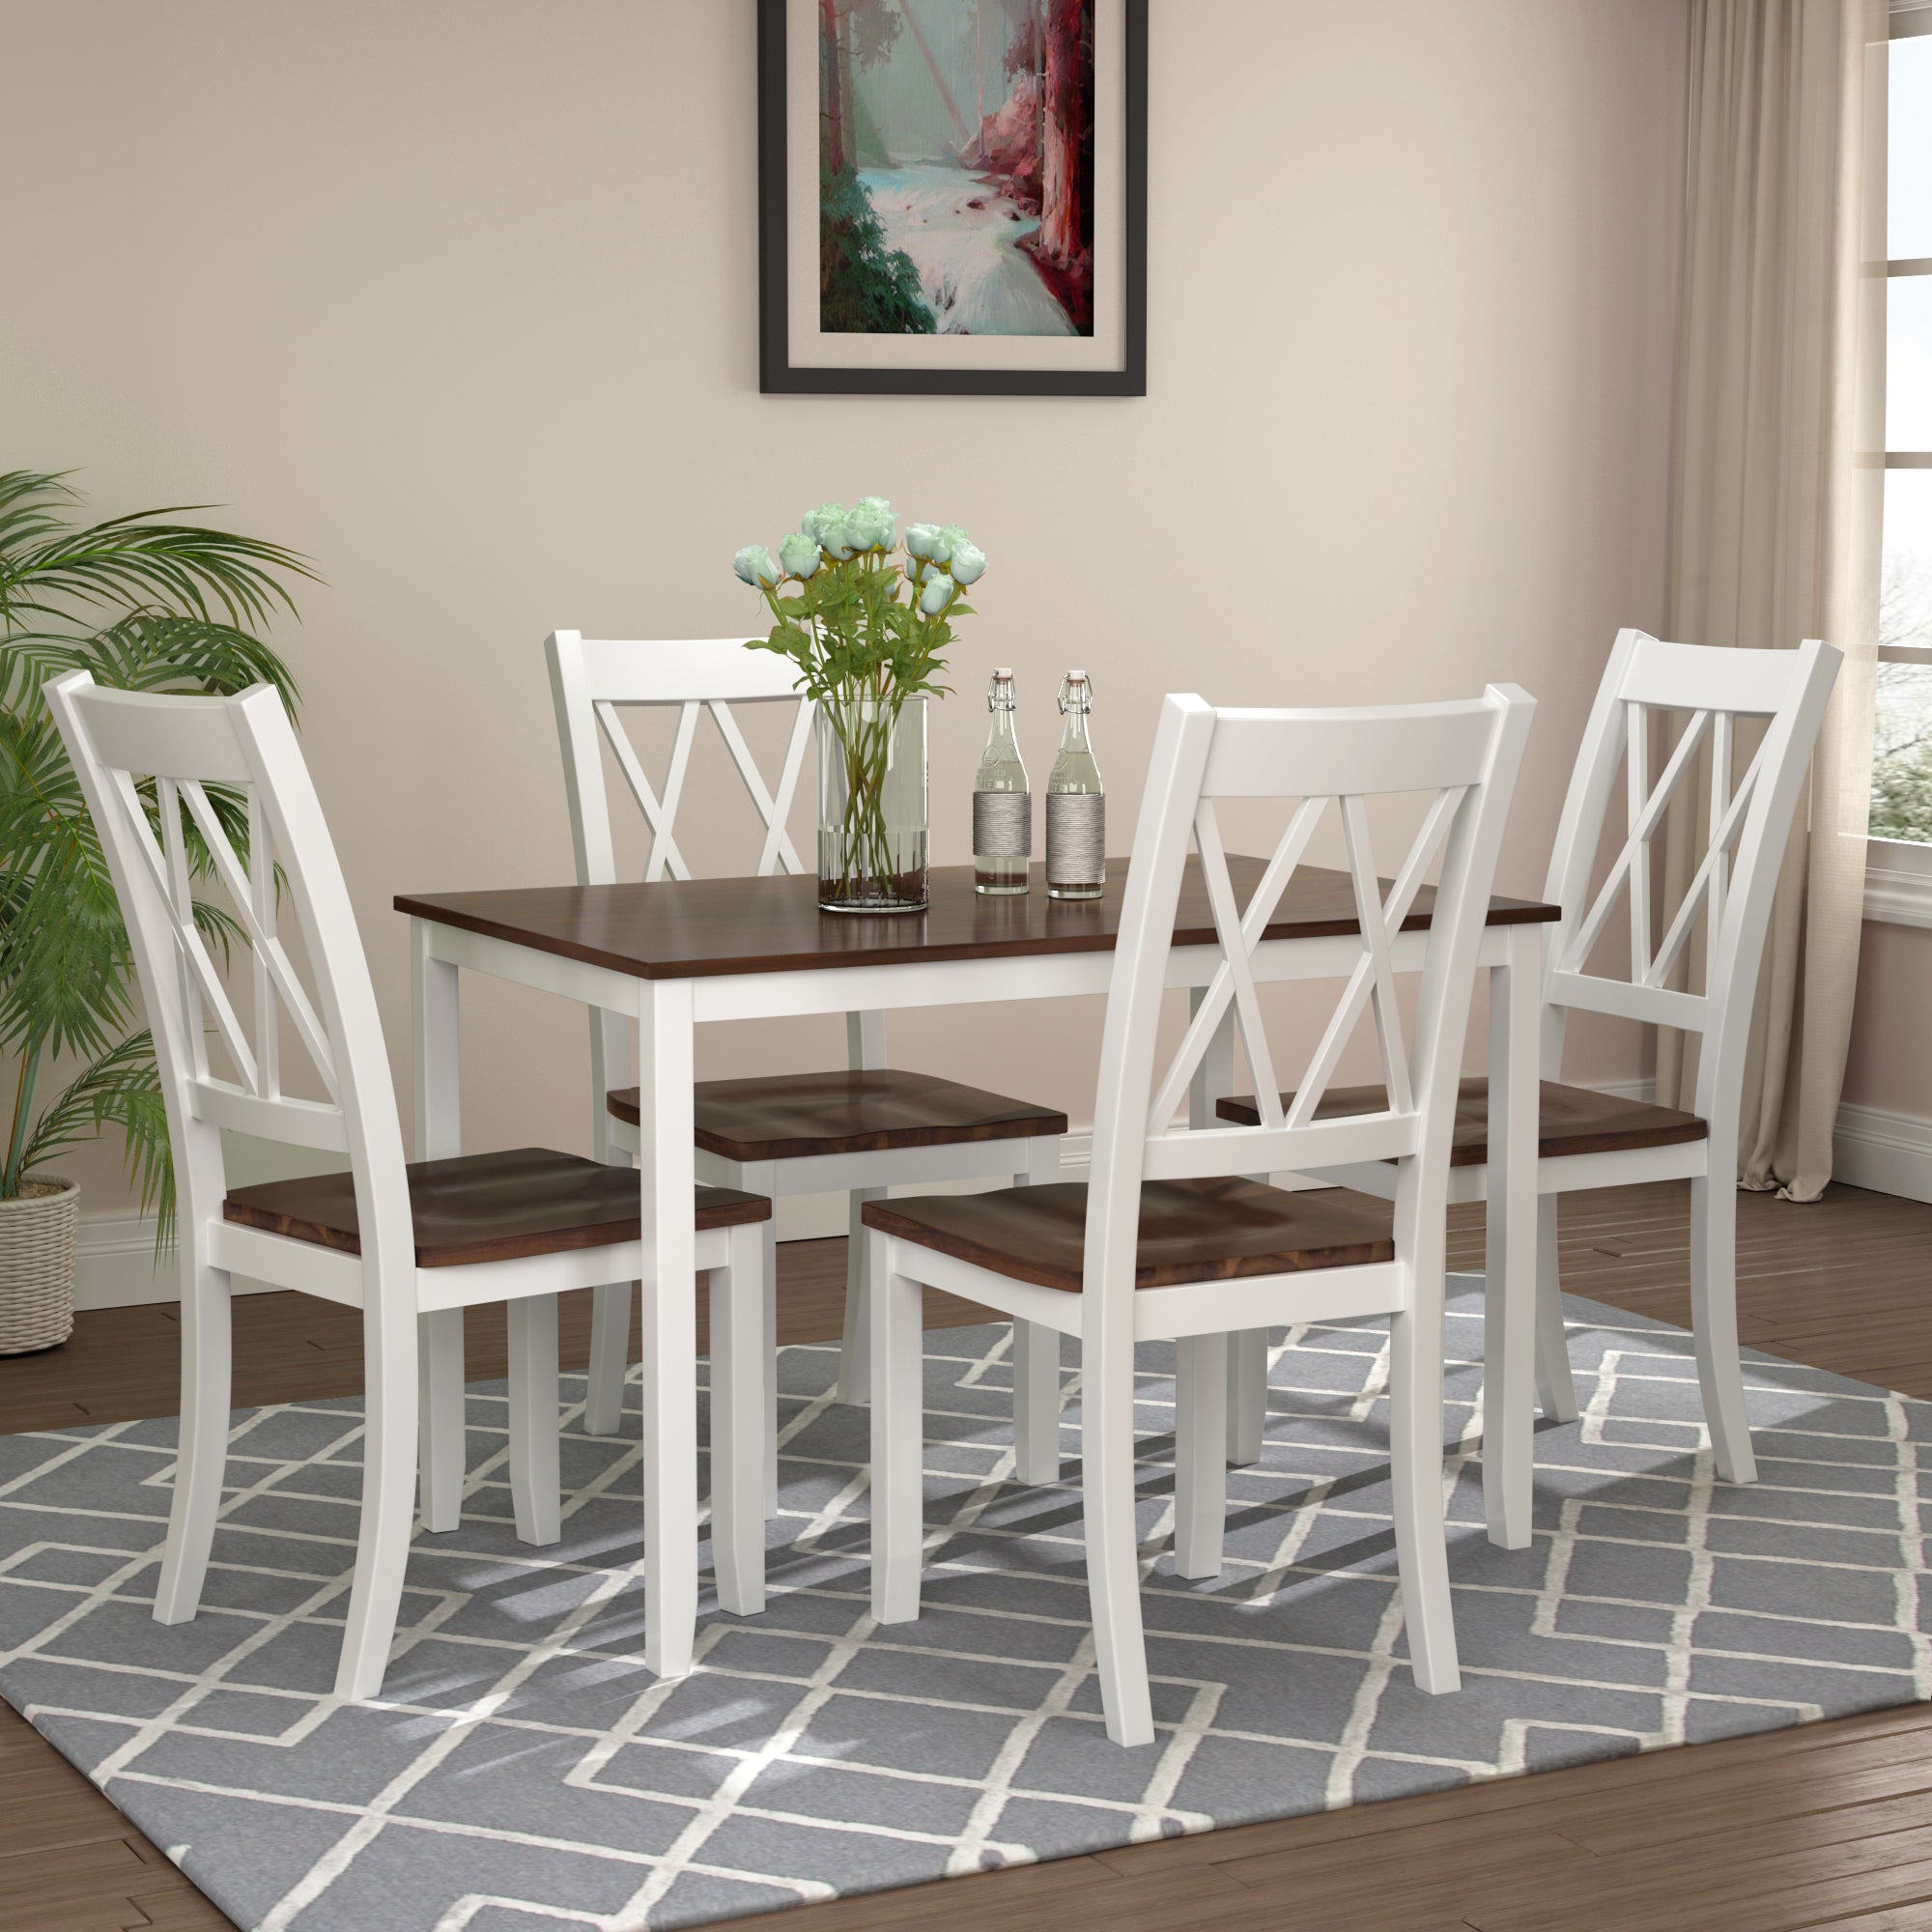 🆓🚛 5-Piece Dining Table Set Home Kitchen Table & Chairs Wood Dining Set, White+Cherry